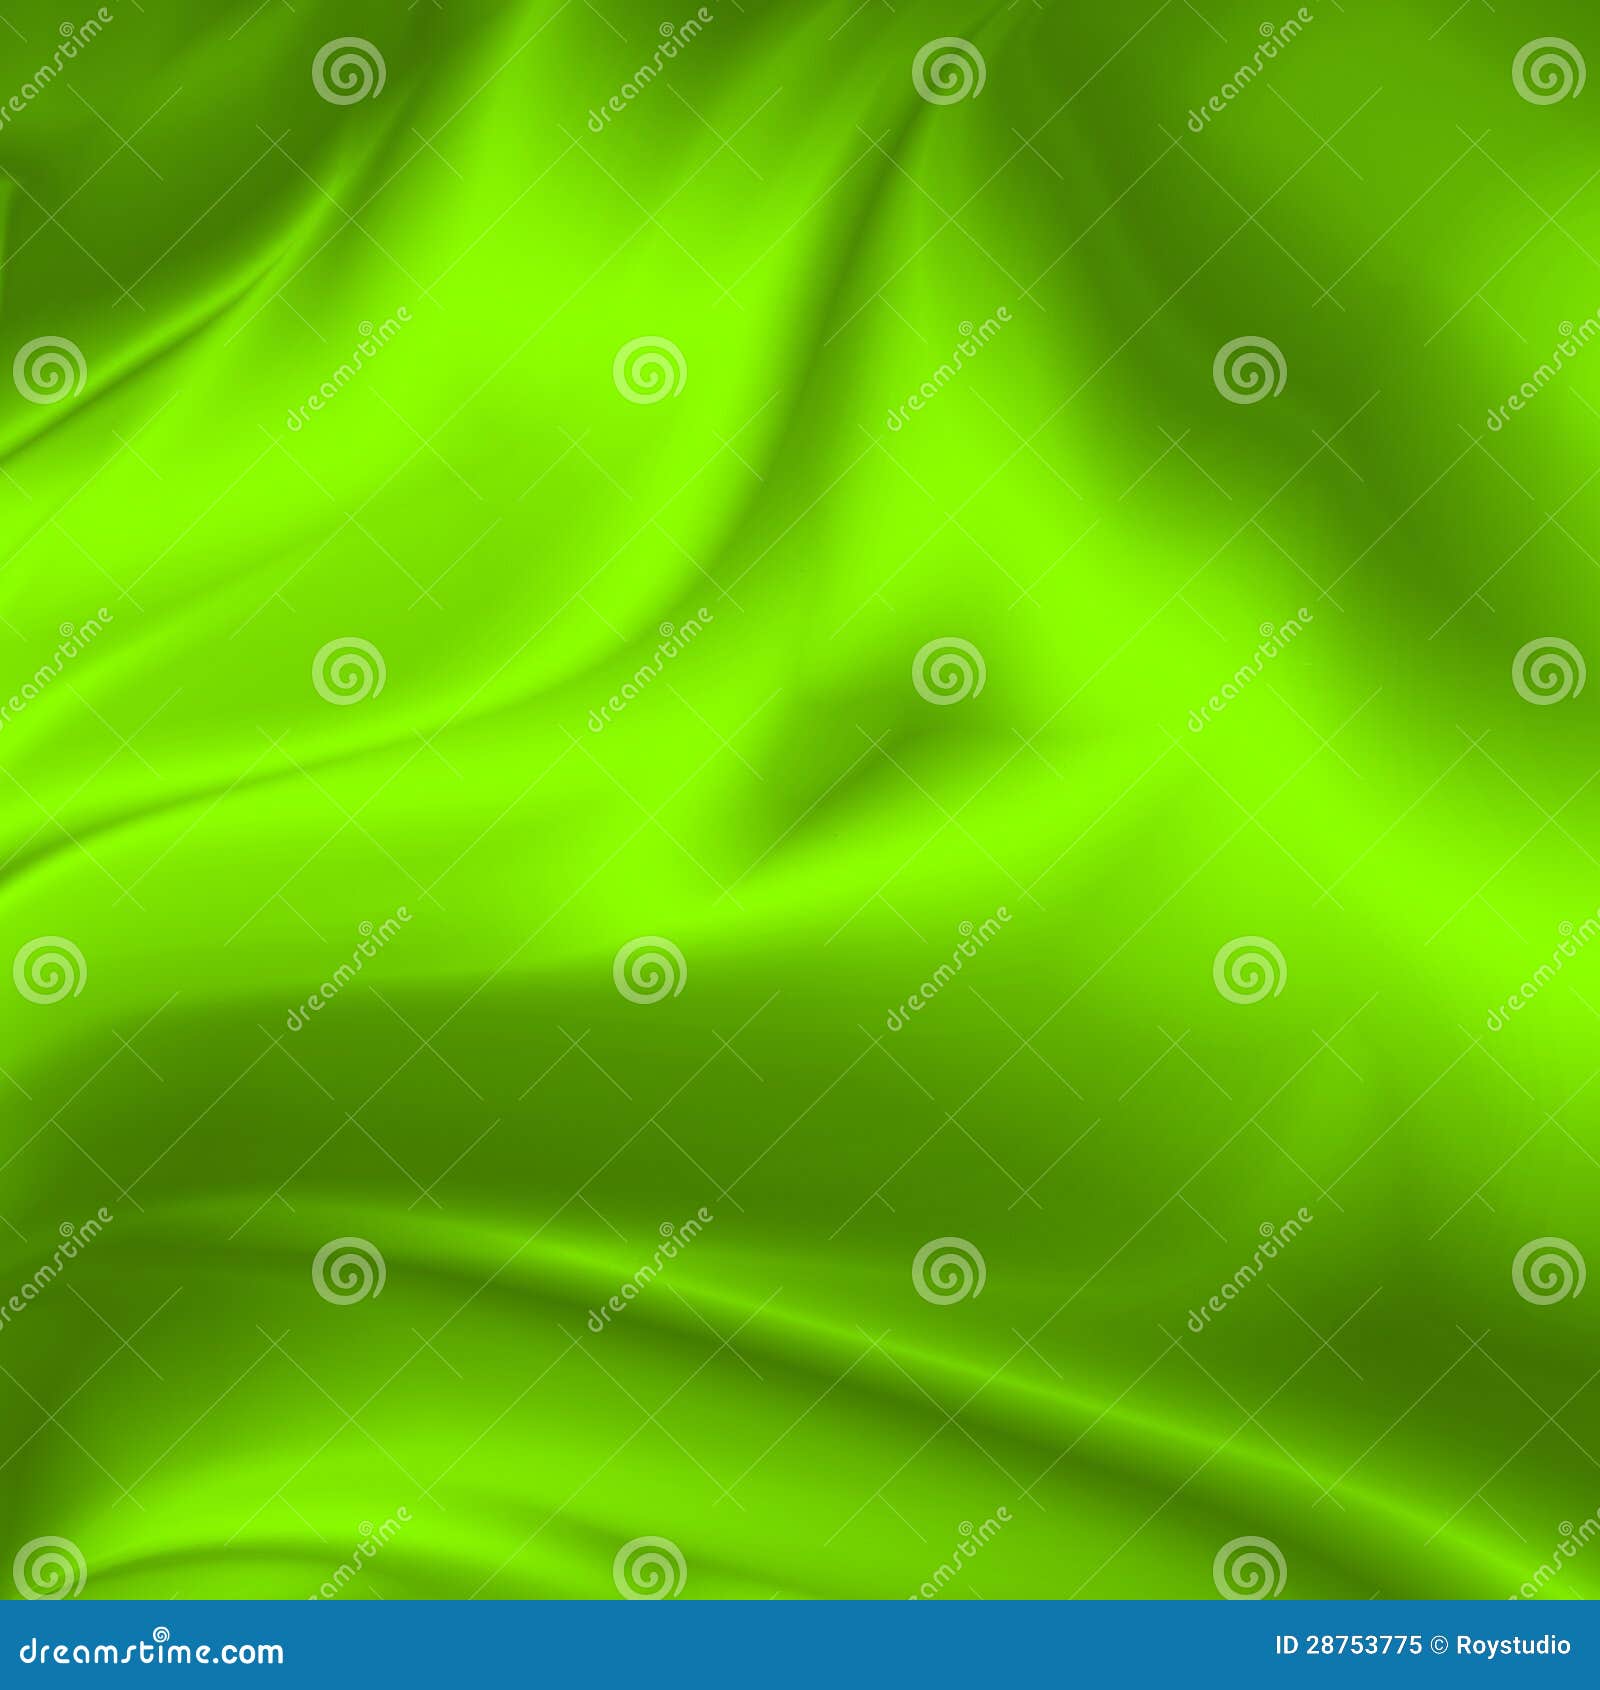 green abstract background creased silk fabric texture